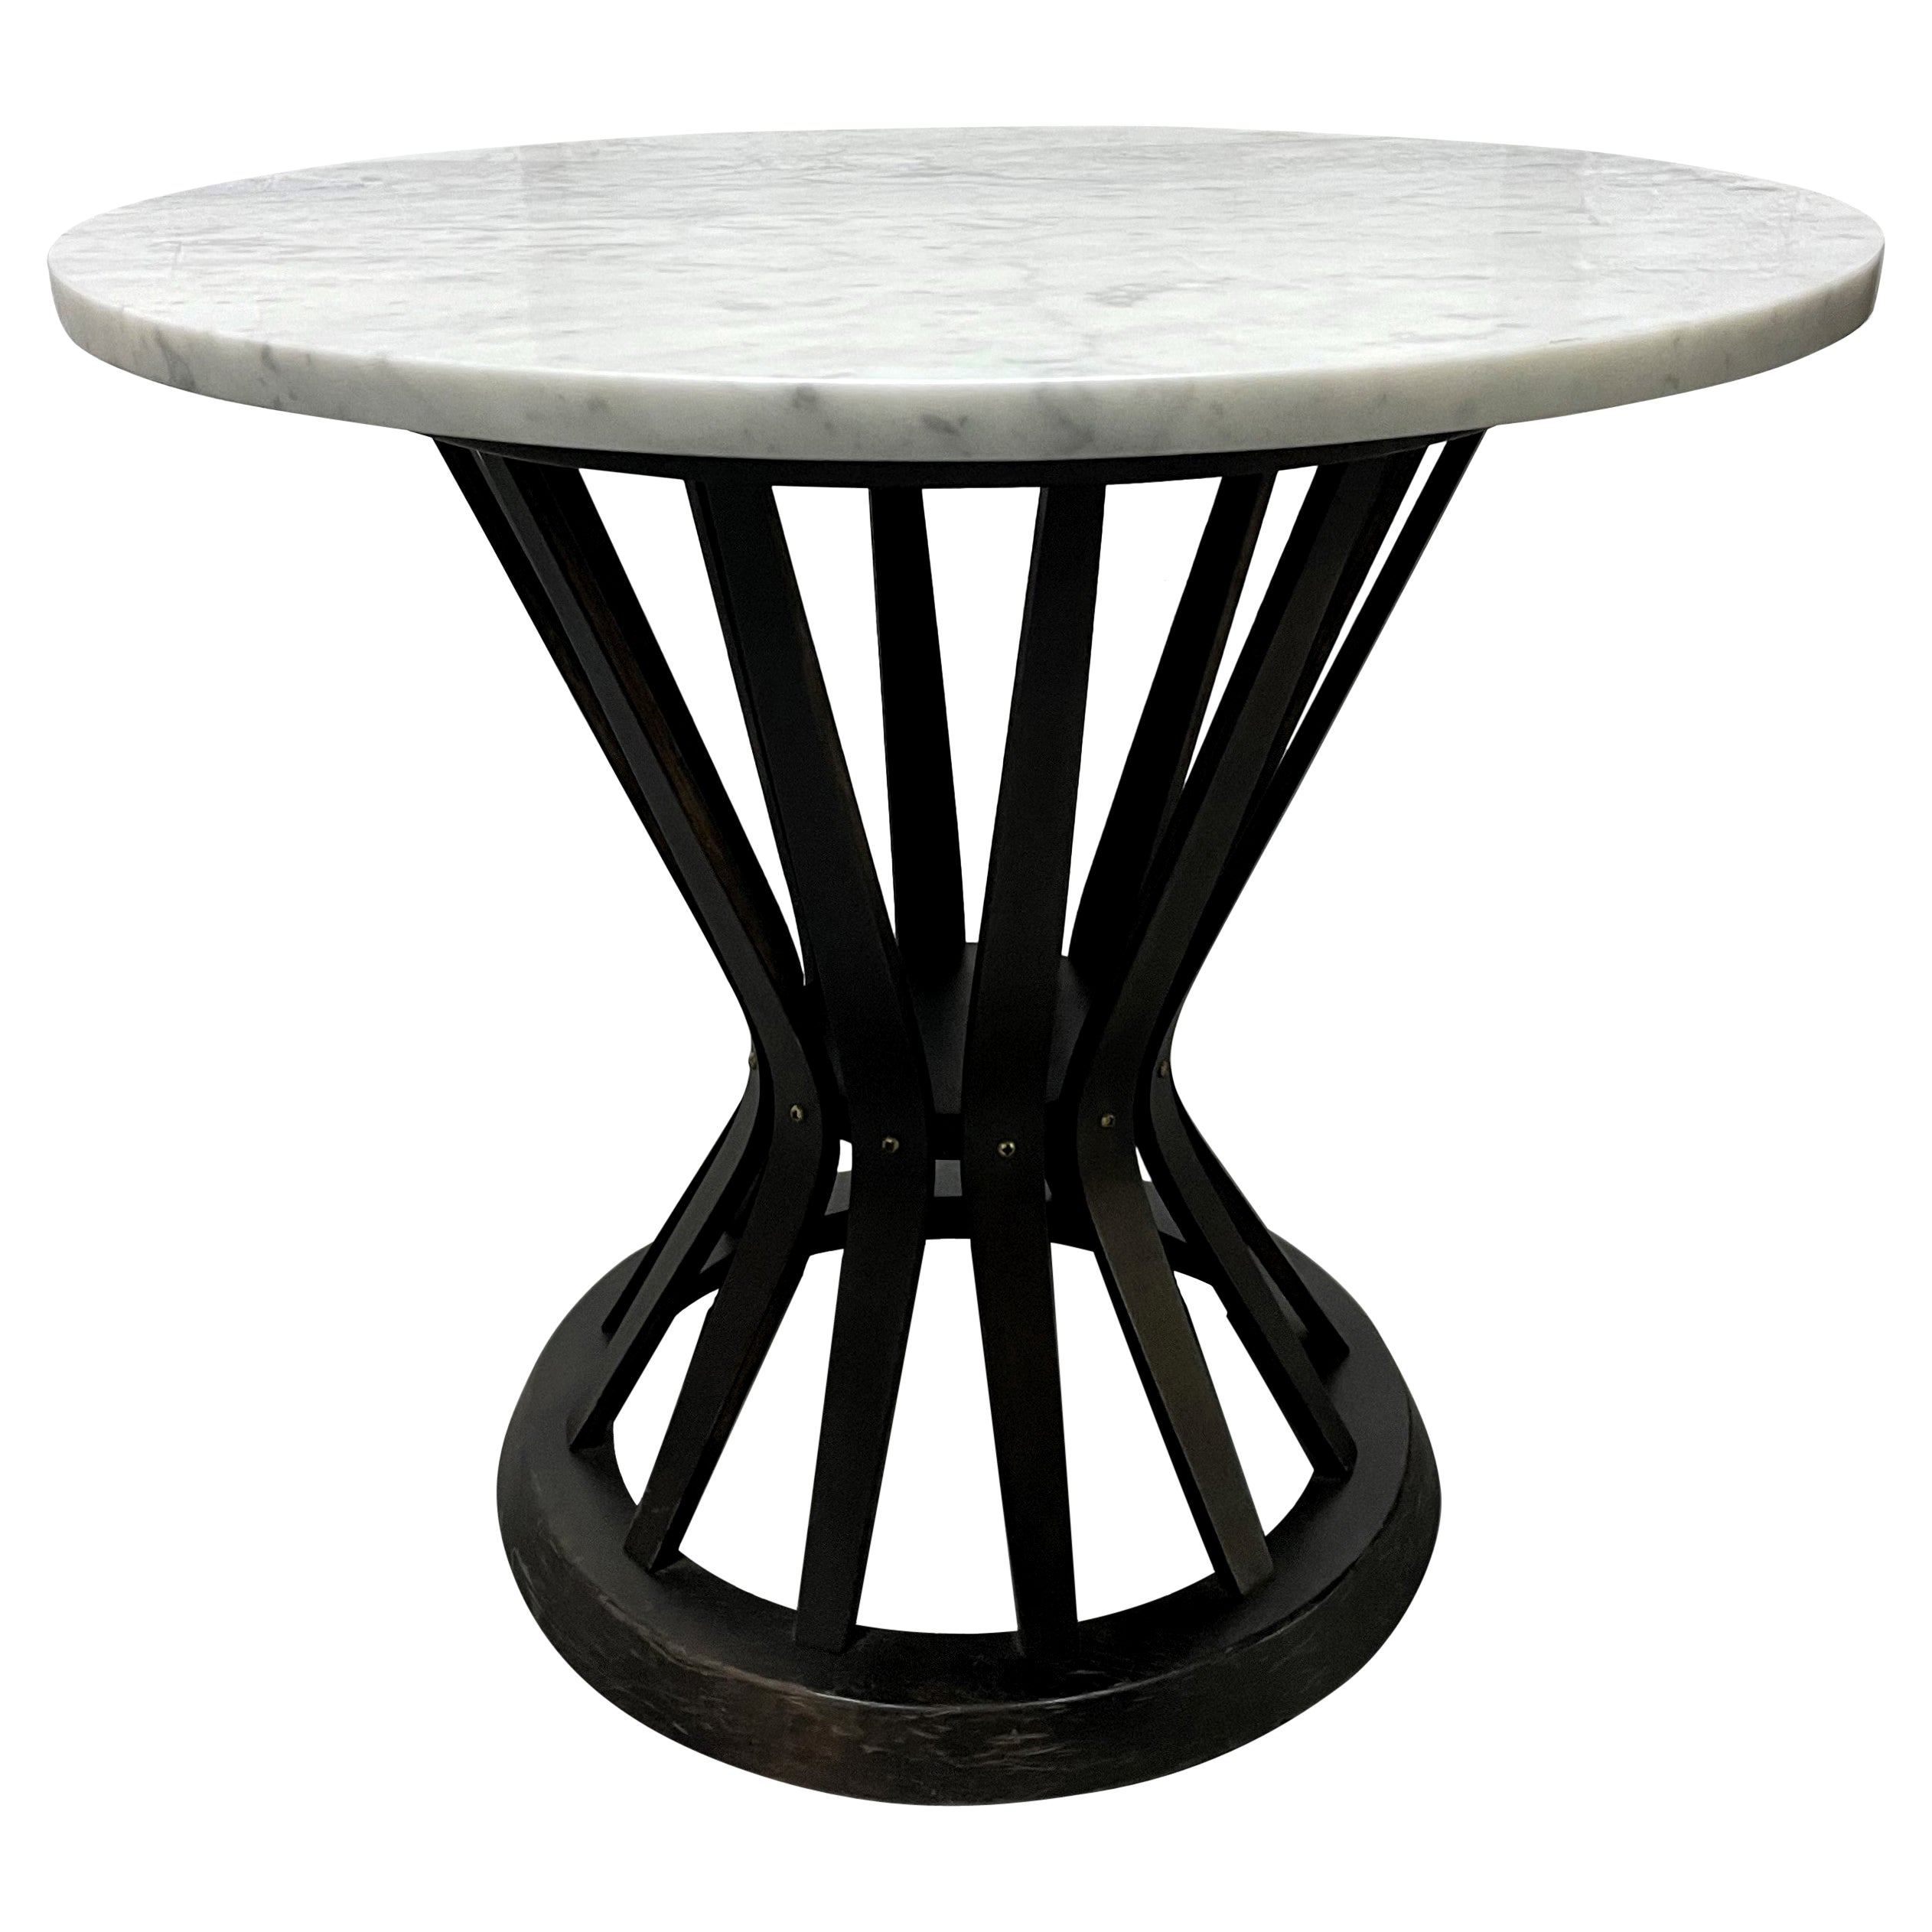 Table d'appoint de style Edward Wormley